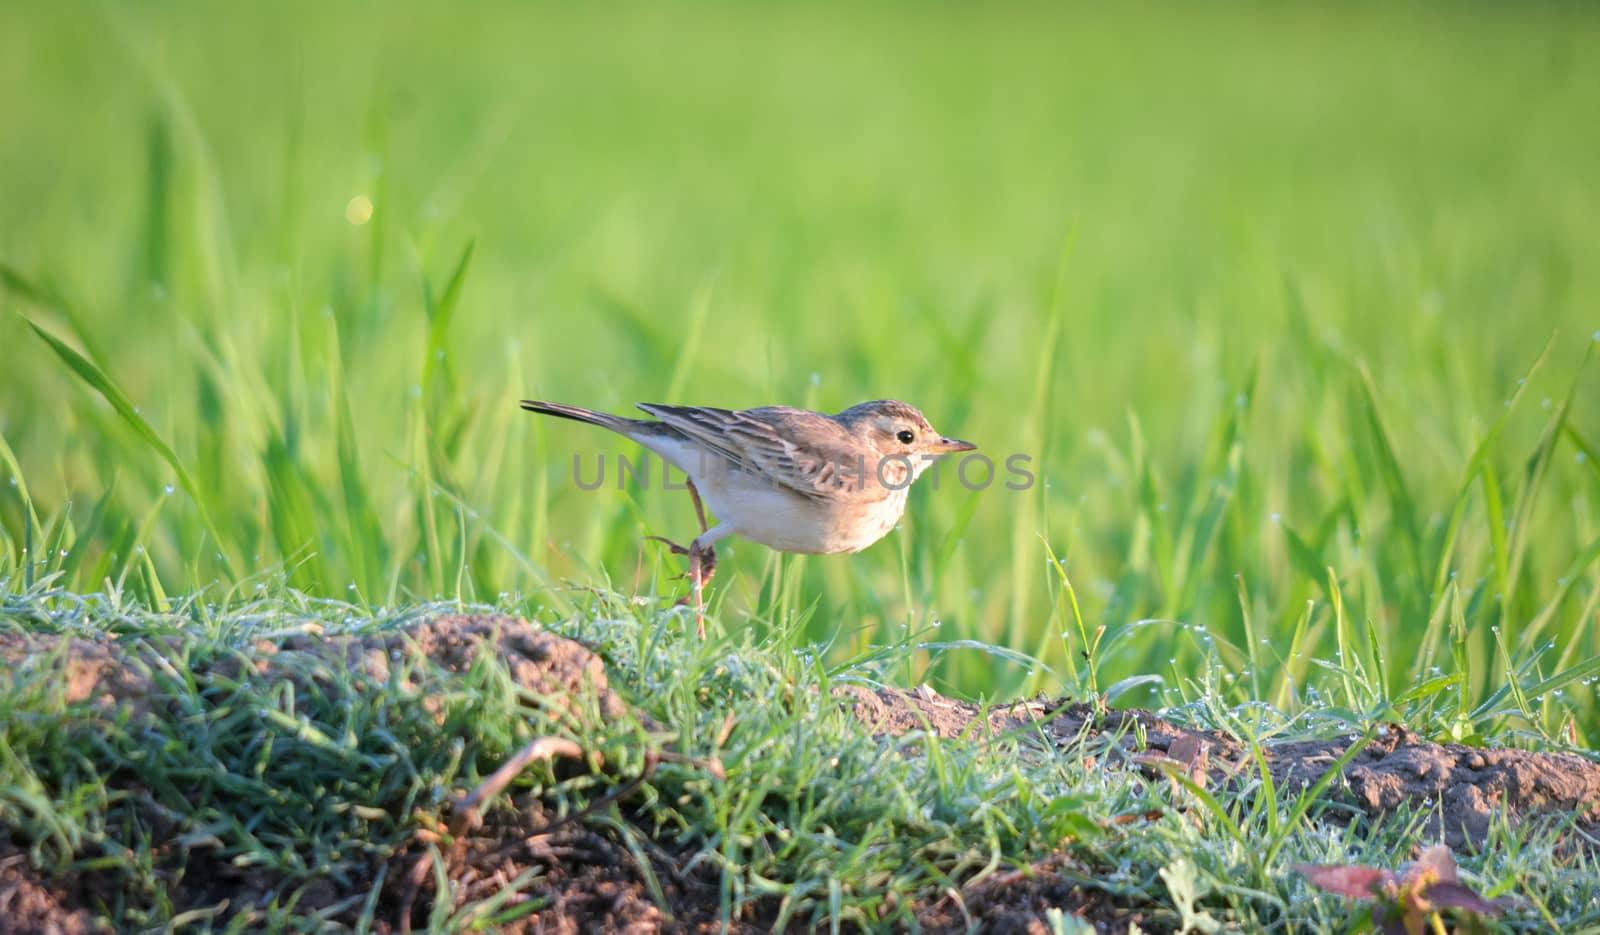 The paddyfield pipit or Oriental pipit is a small passerine bird in the pipit and wagtail family. It is a resident breeder in open scrub, grassland and cultivation.